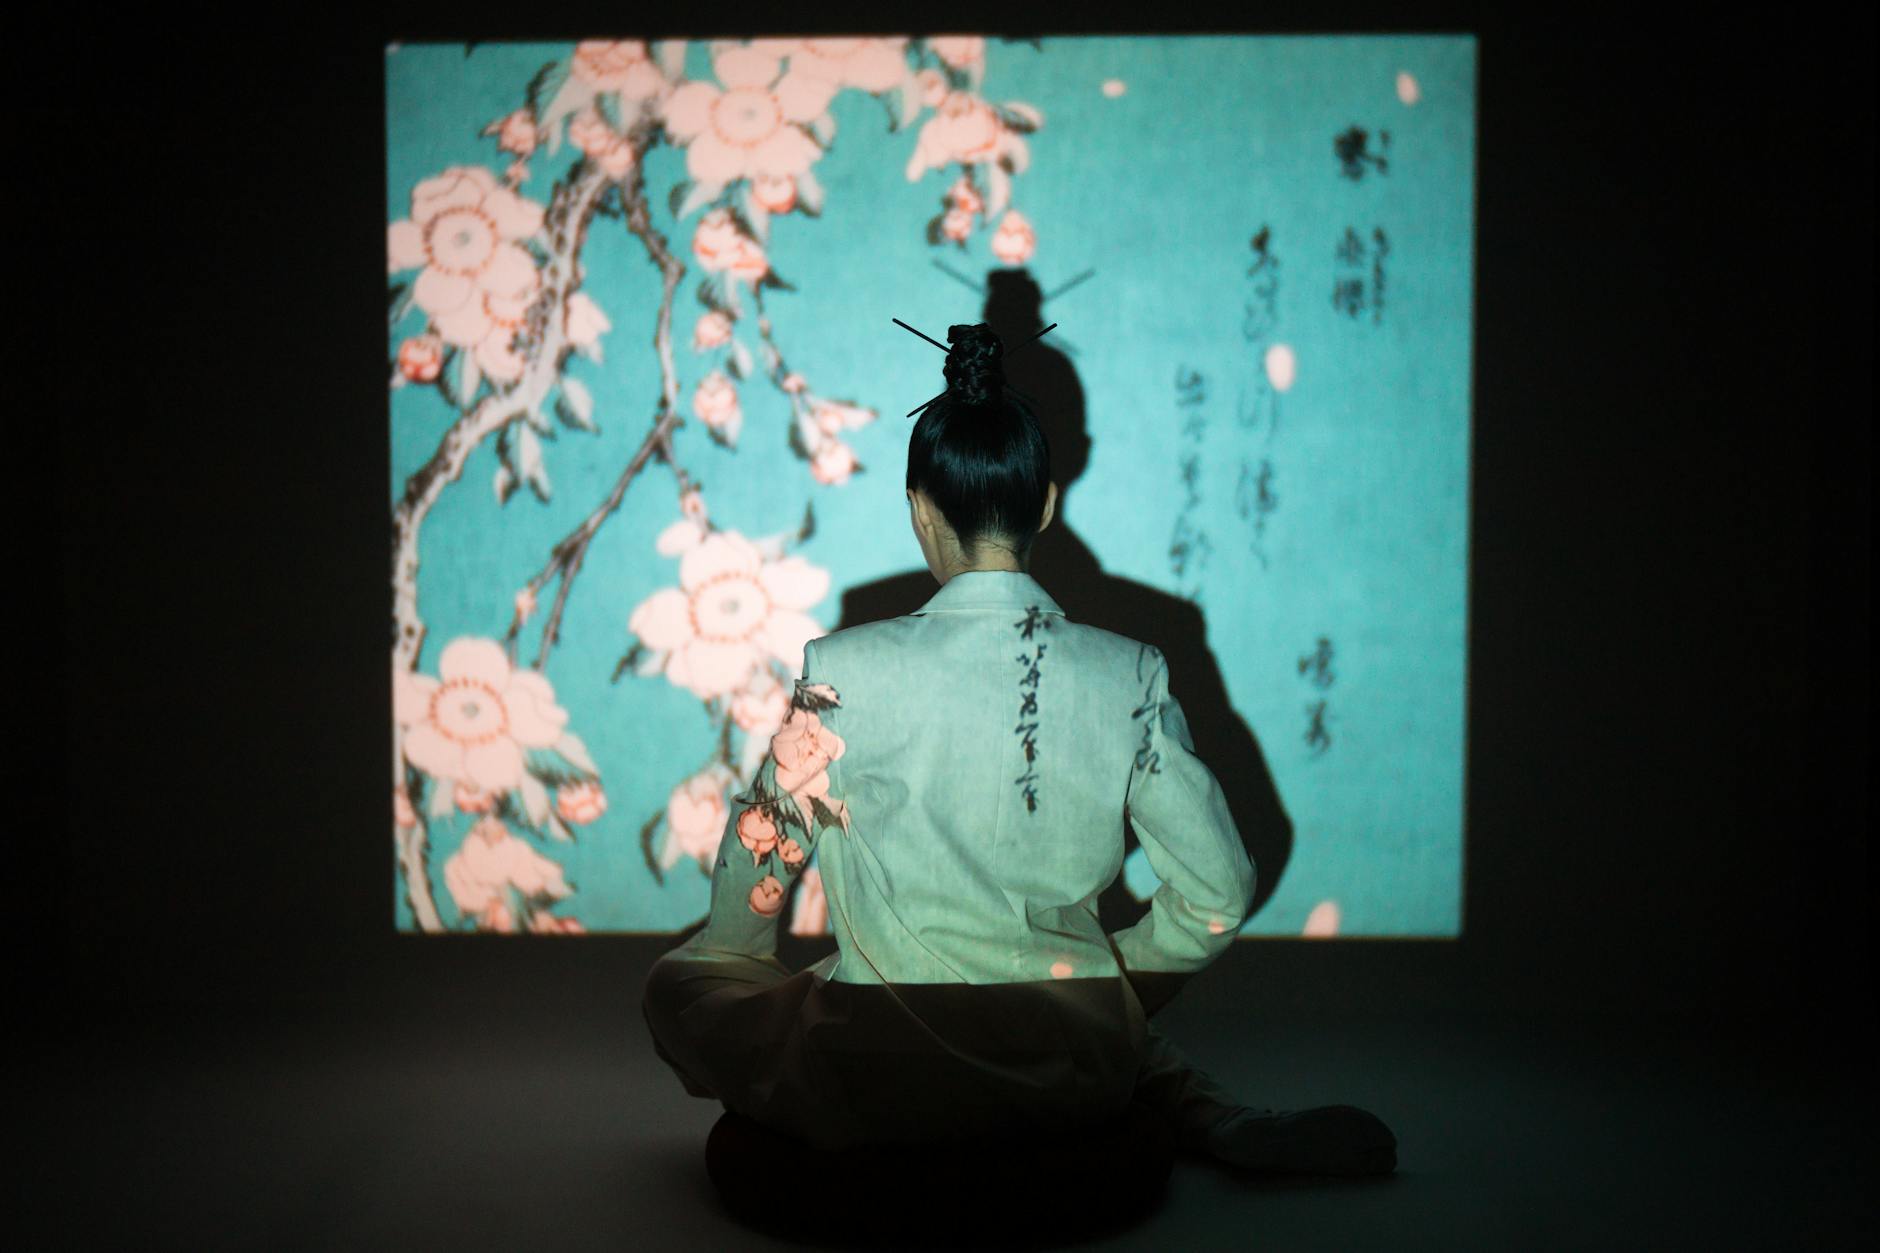 Back View of a Woman Sitting in front of a Projection